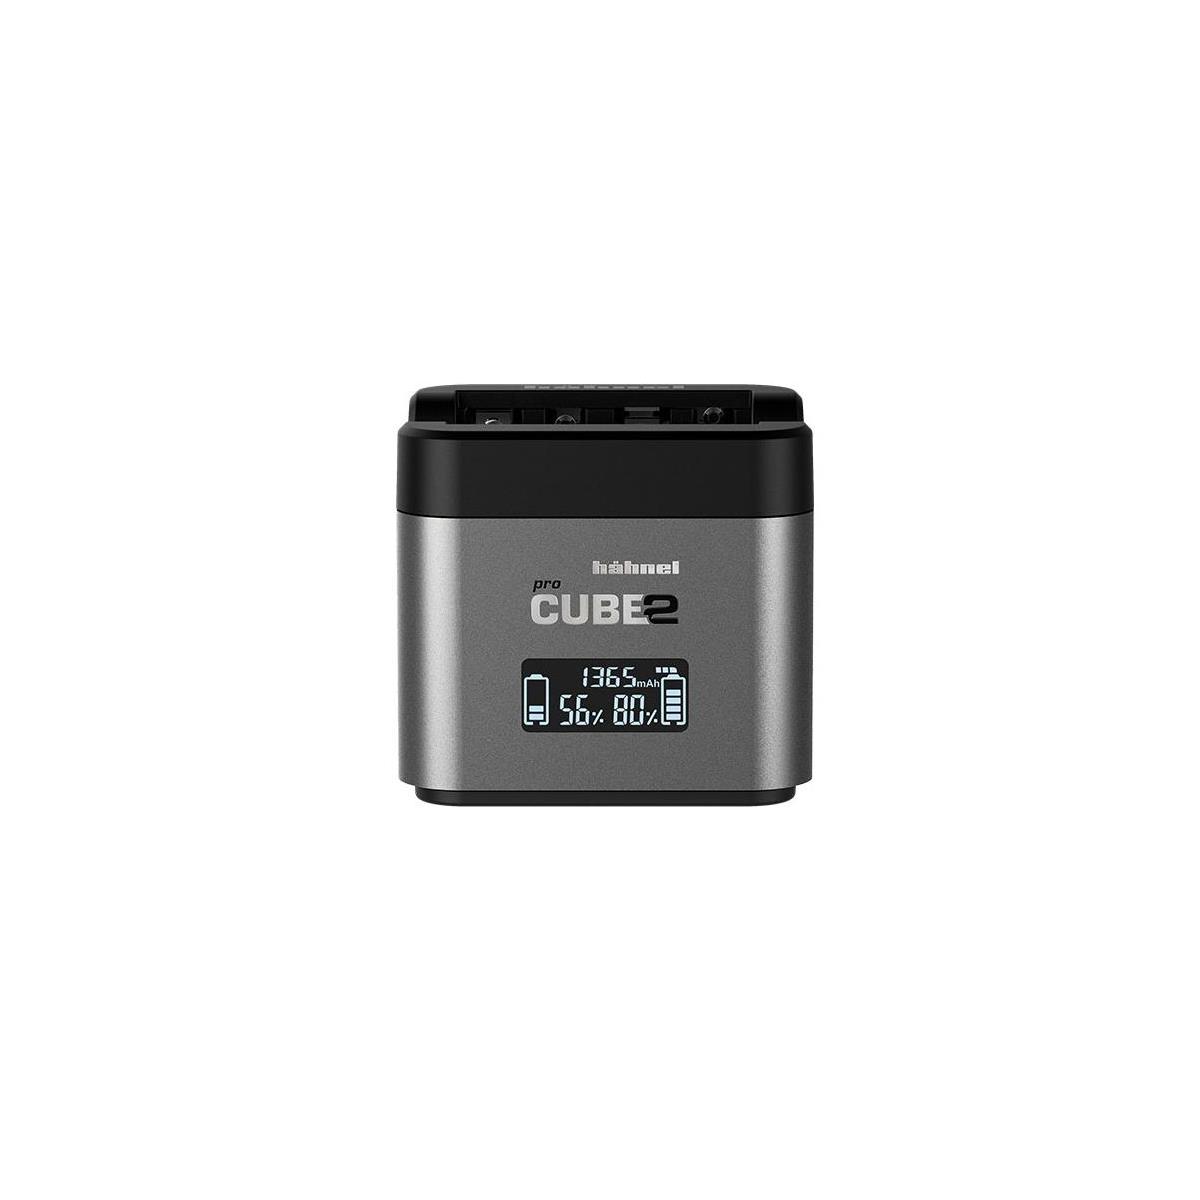 Image of Hahnel PROCUBE2 Professional Twin Battery Charger for Nikon DSLR Cameras